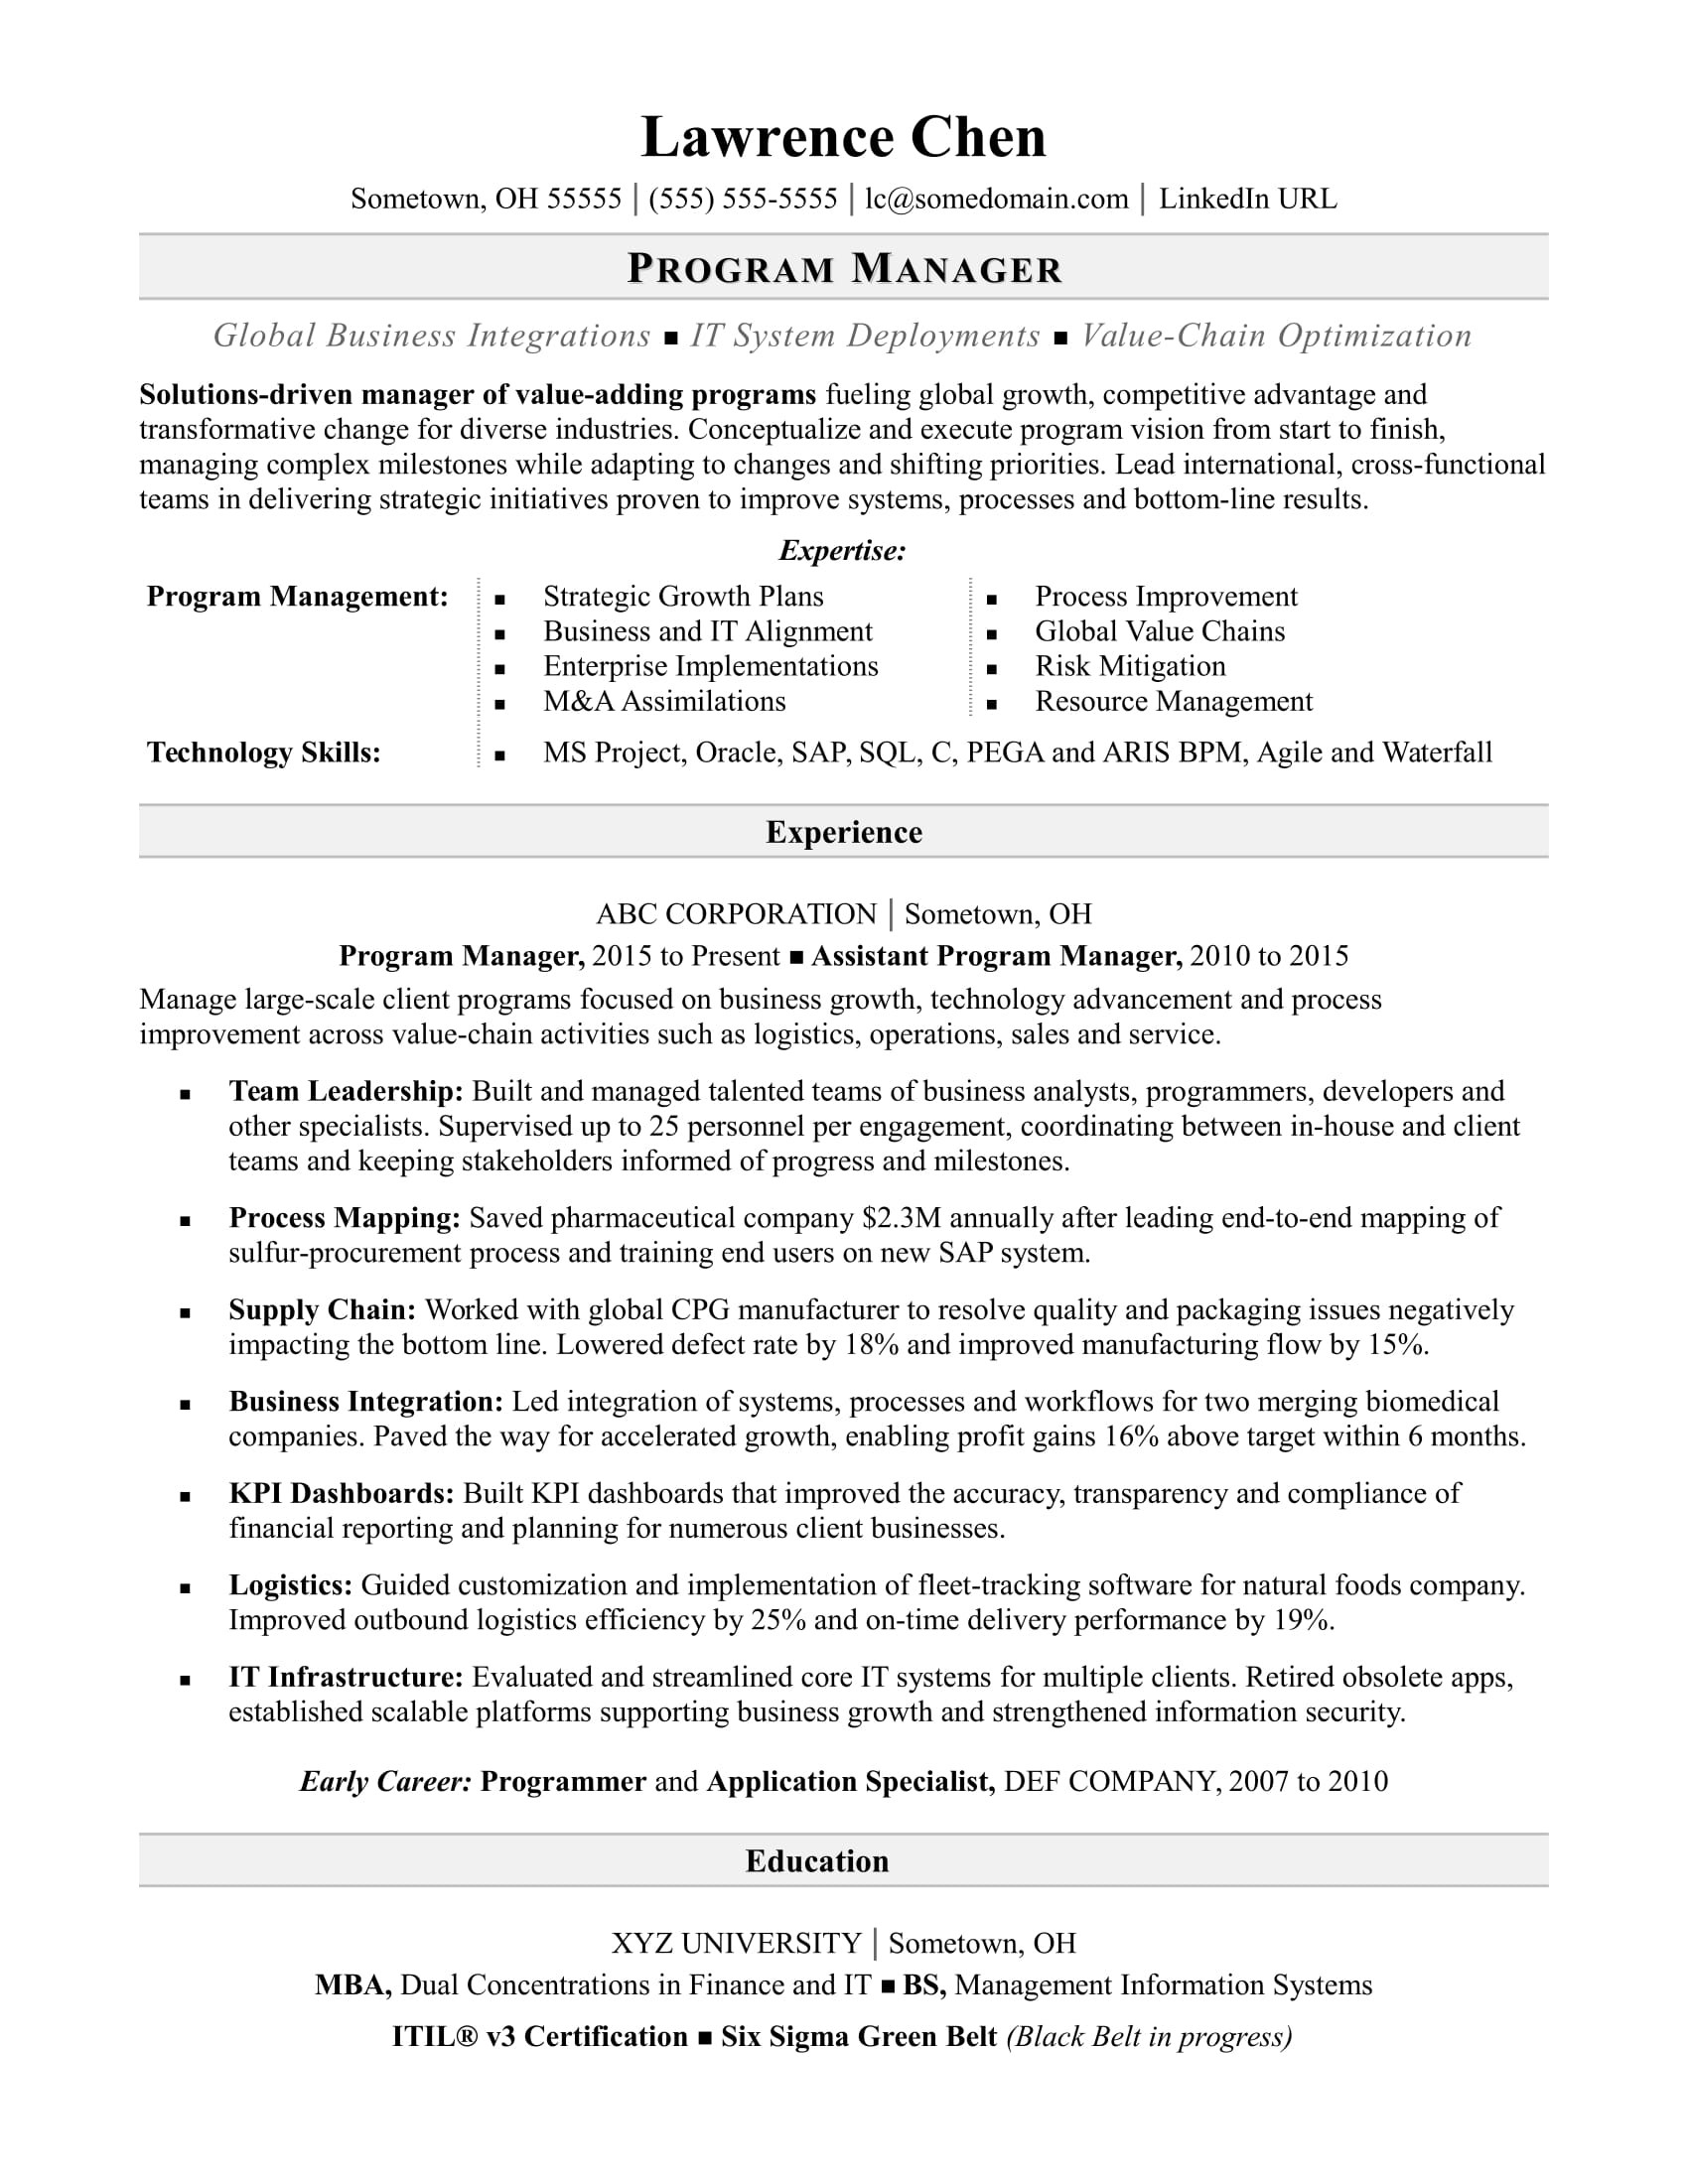 Sample Resumes for Managers and Executives Program Manager Resume Monster.com